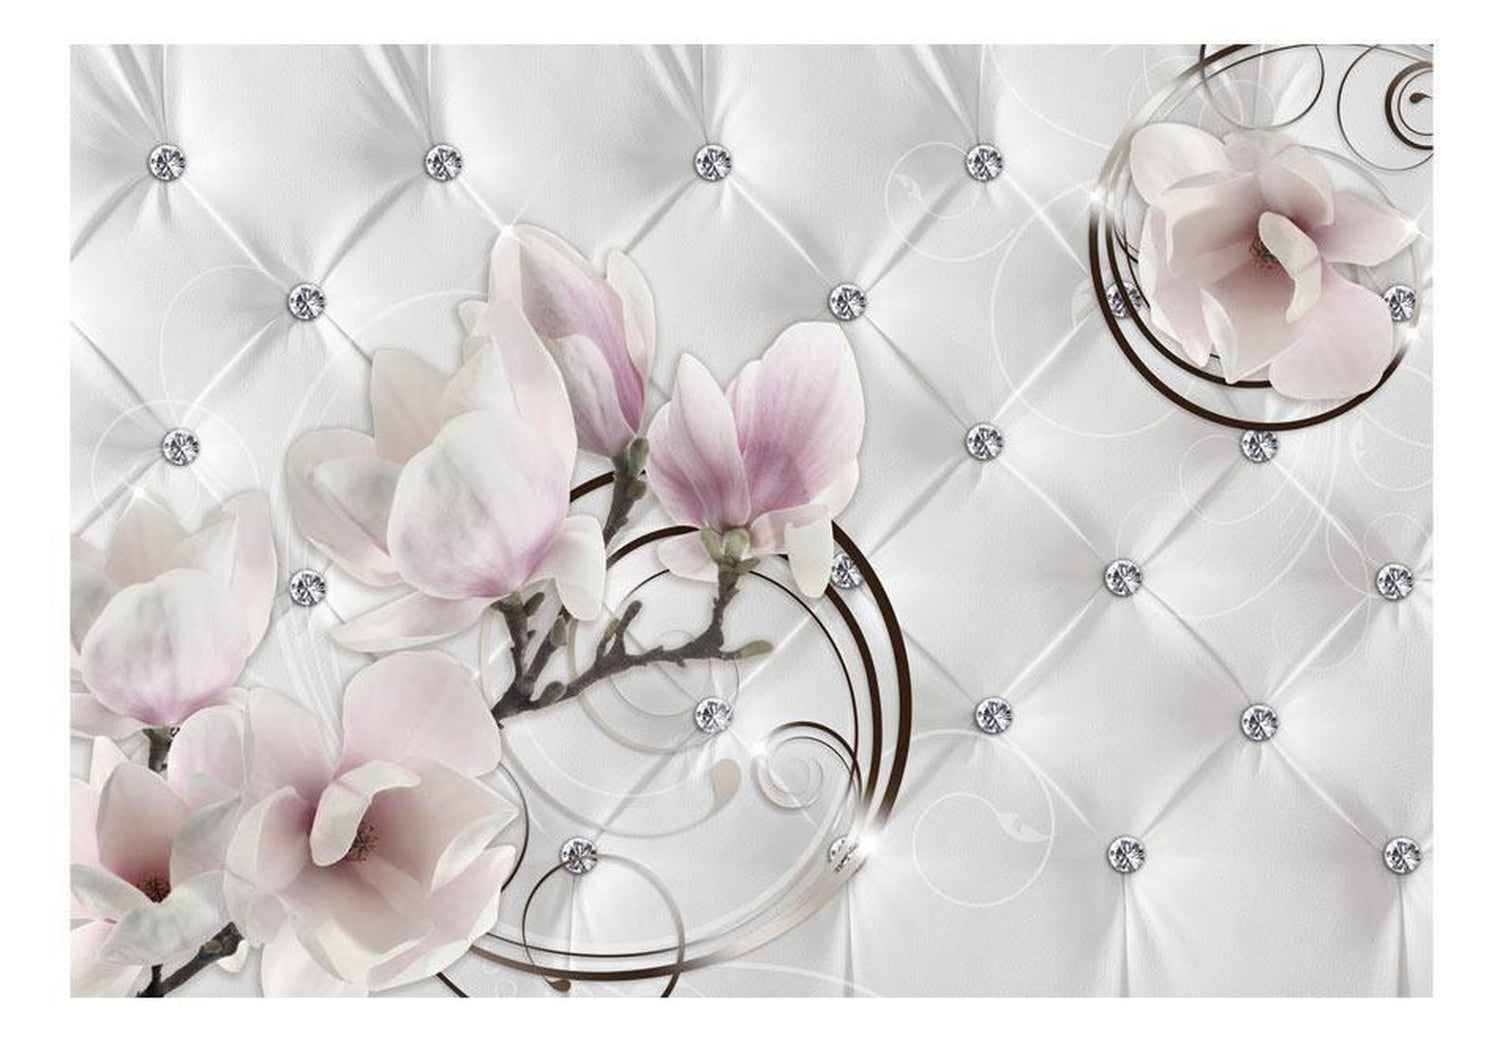 Peel and stick wall mural - Flower Luxury-TipTopHomeDecor